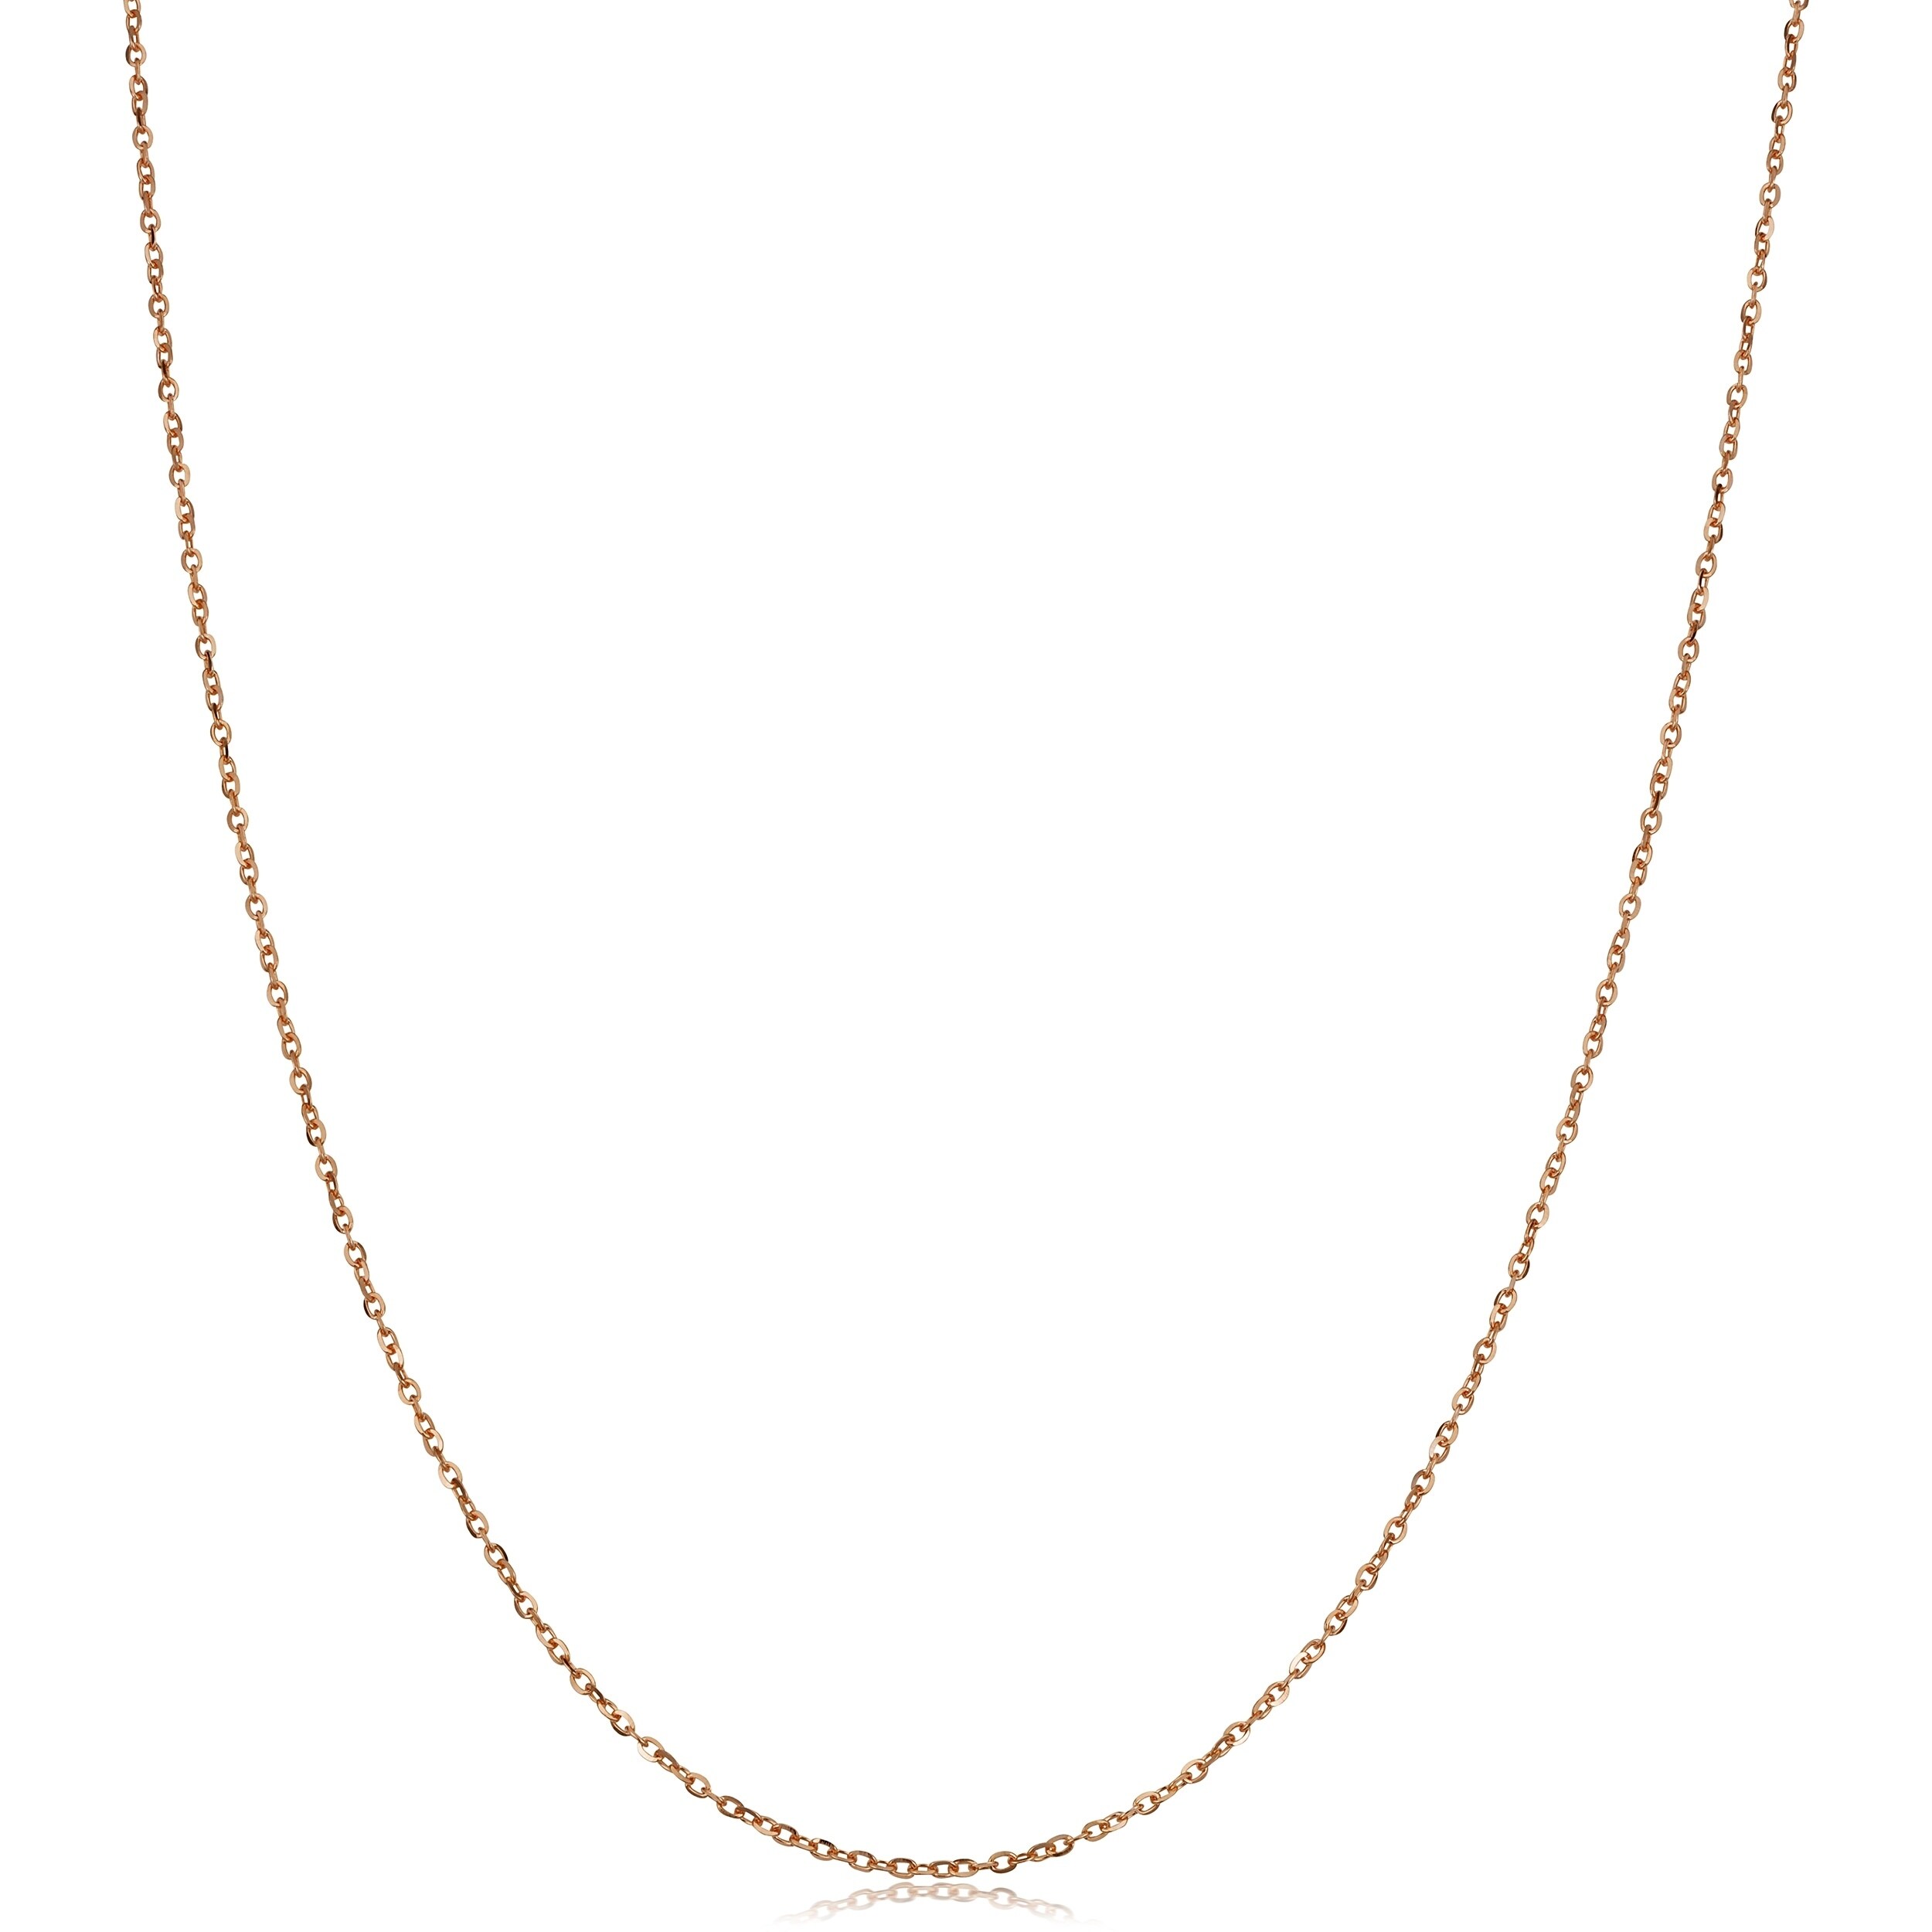 IcedTime 14K Rose Gold Cable Chain 20 inch long x1.1mm wide 